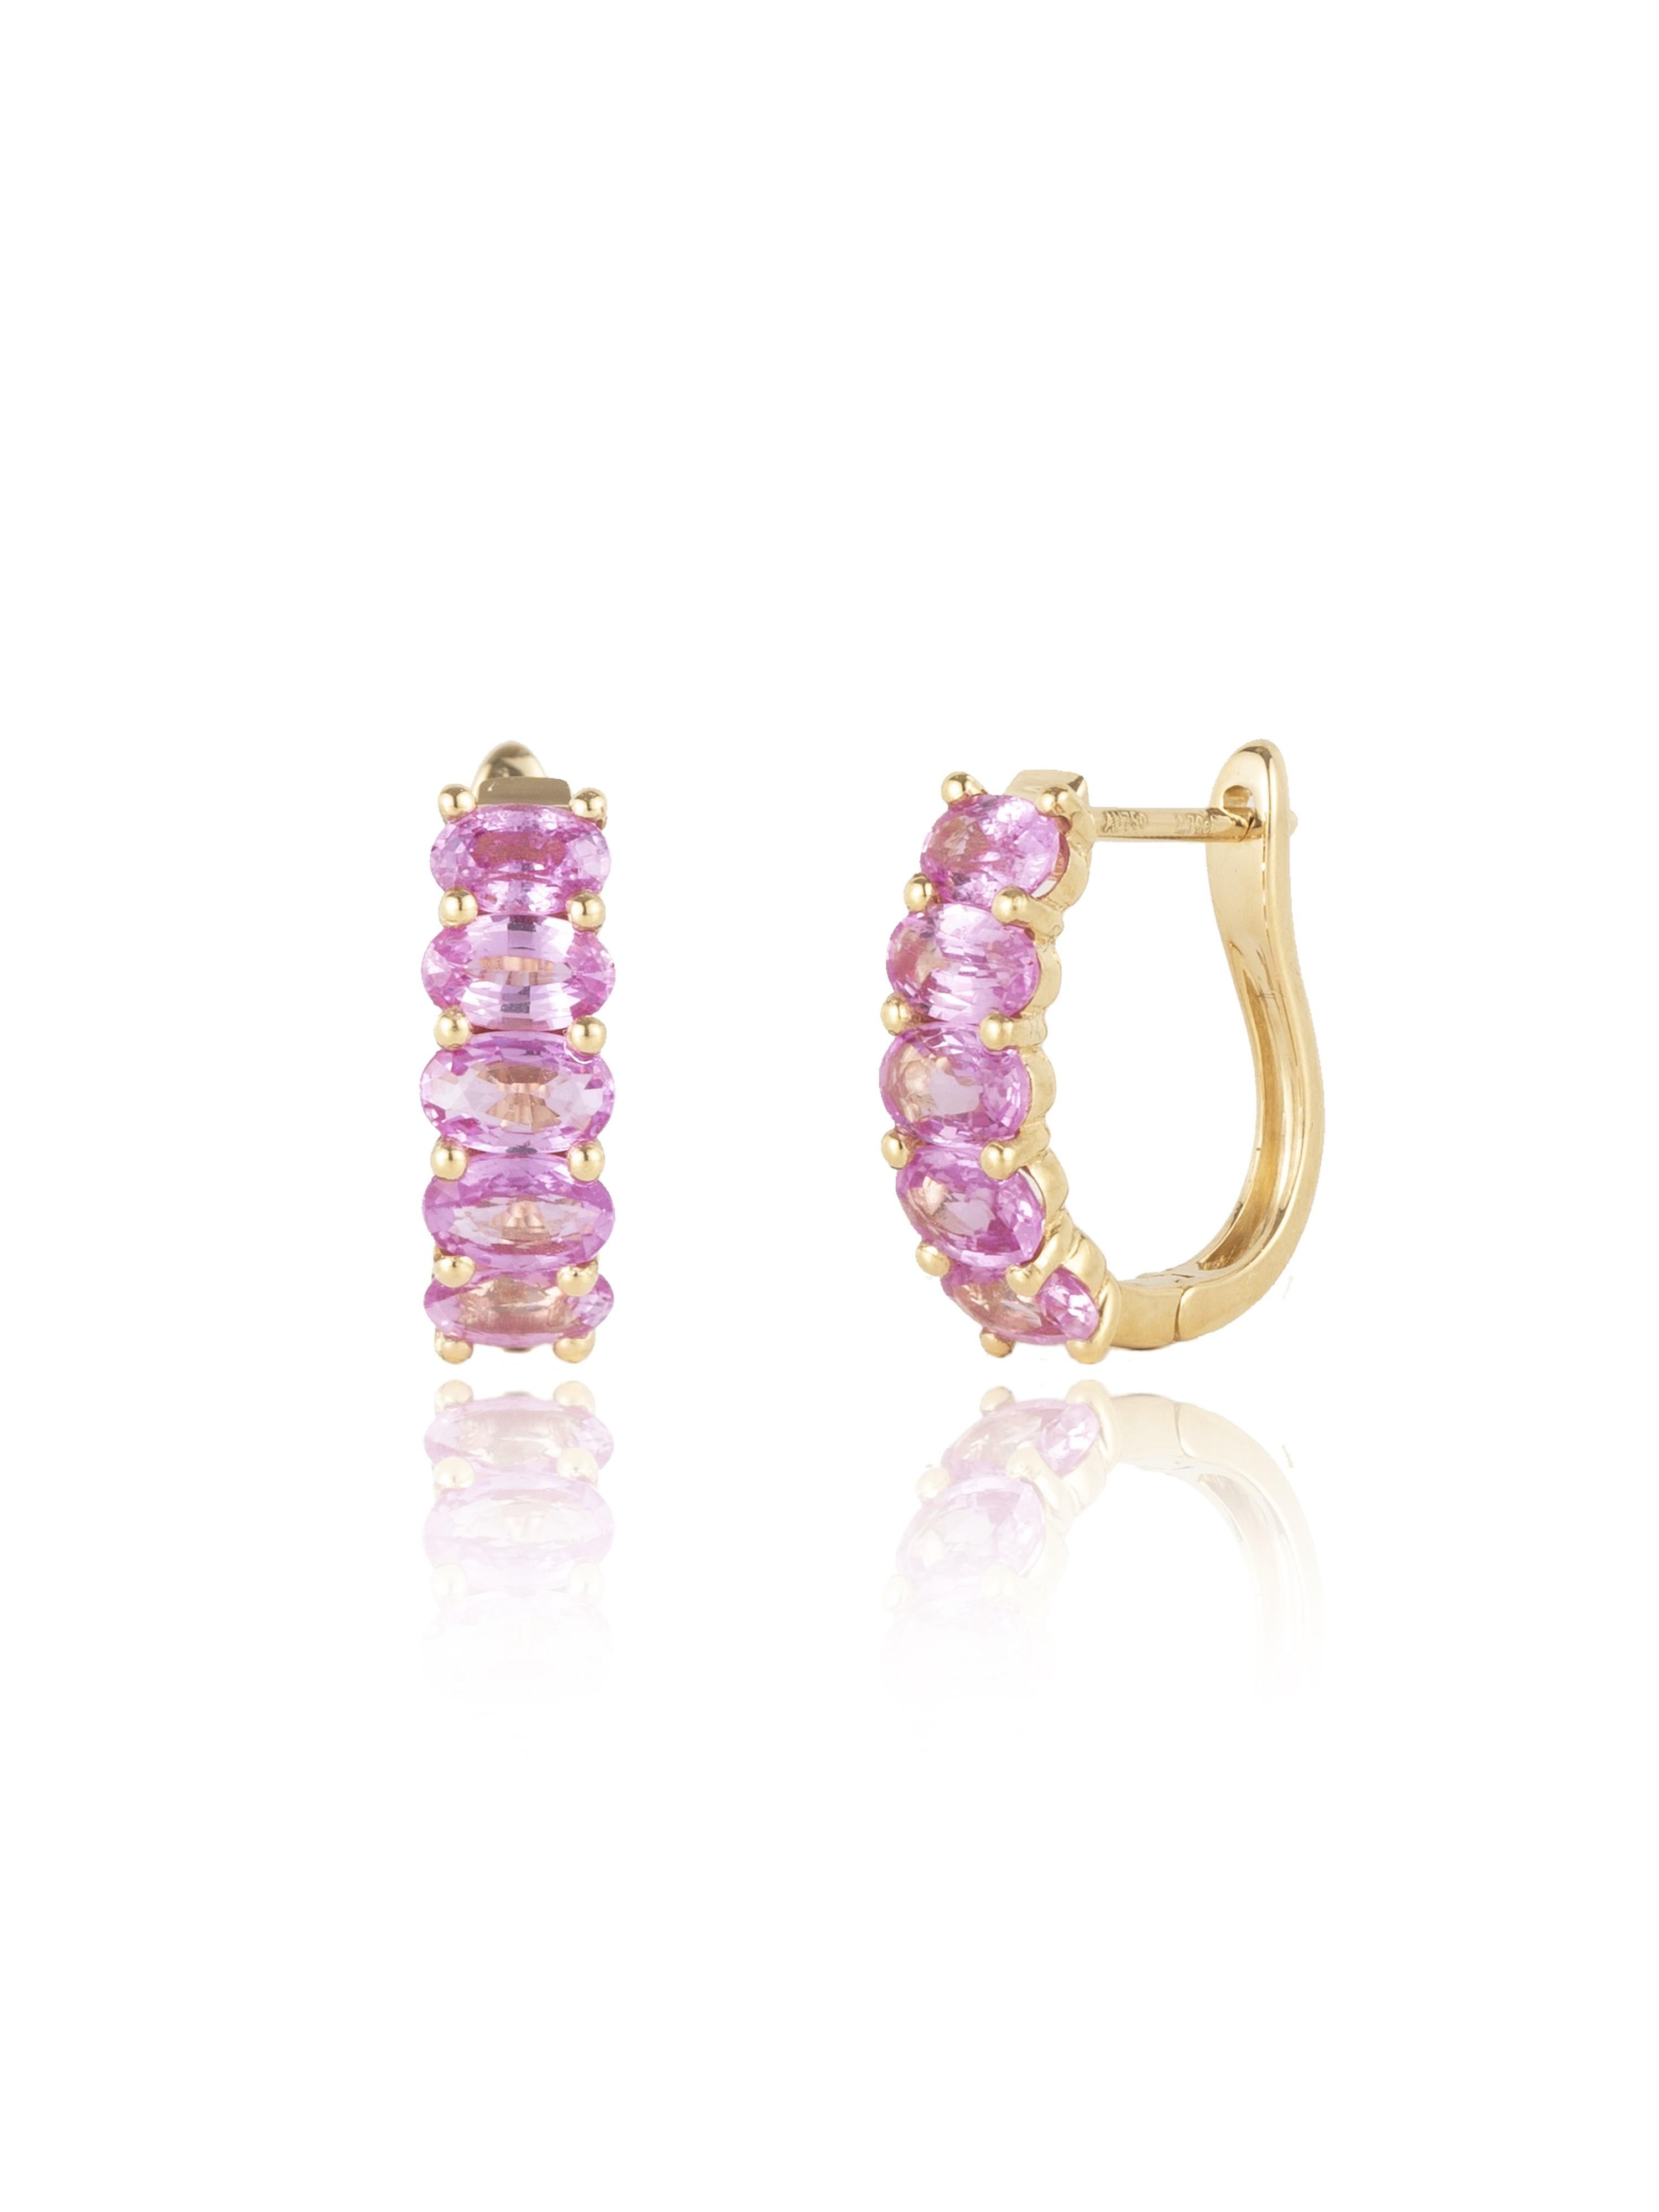 Discover Nina Zhou Pink Sapphire Huggie Earrings with 12-13mm Pearl Enhancers in 18k Yellow Gold. These earrings blend the serene glow of Pearls with the timeless sparkle of pink sapphire, all cradled in a delicate, classic hoop design. Enhanced by